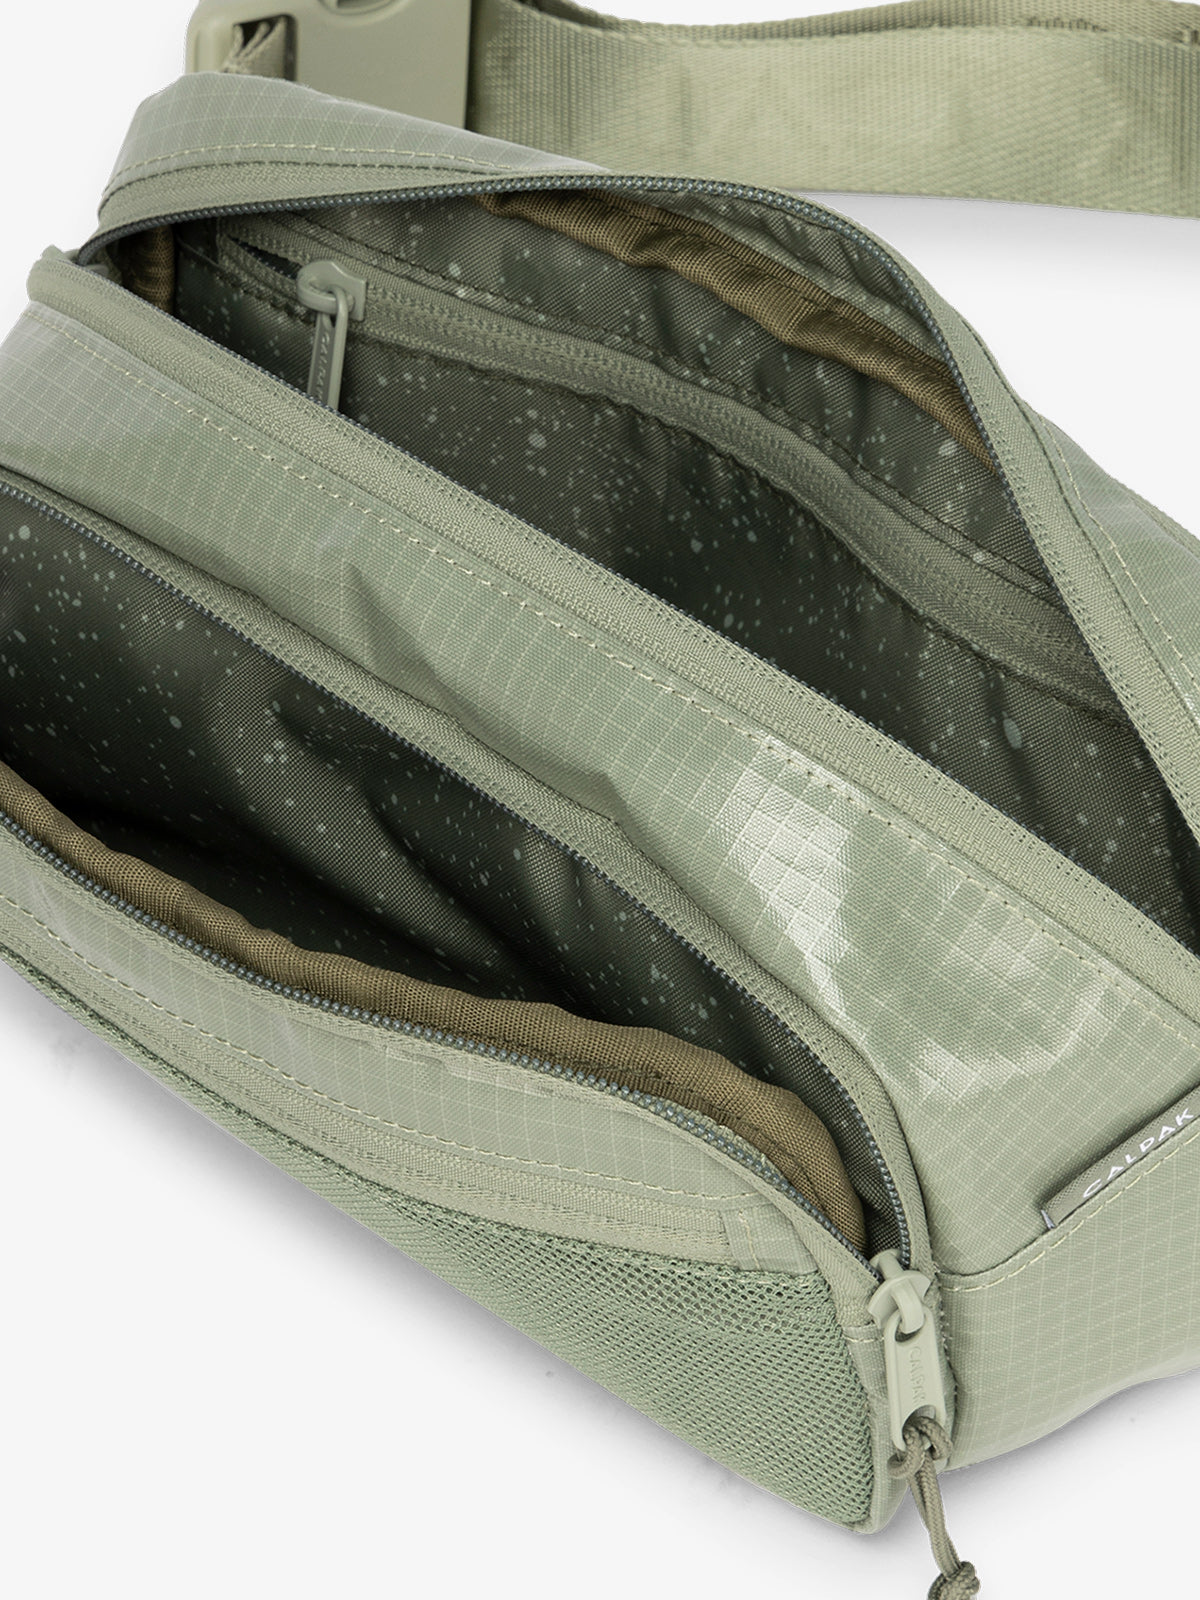 Terra hiking belt bag with multiple interior pockets and water resistant exterior in juniper green